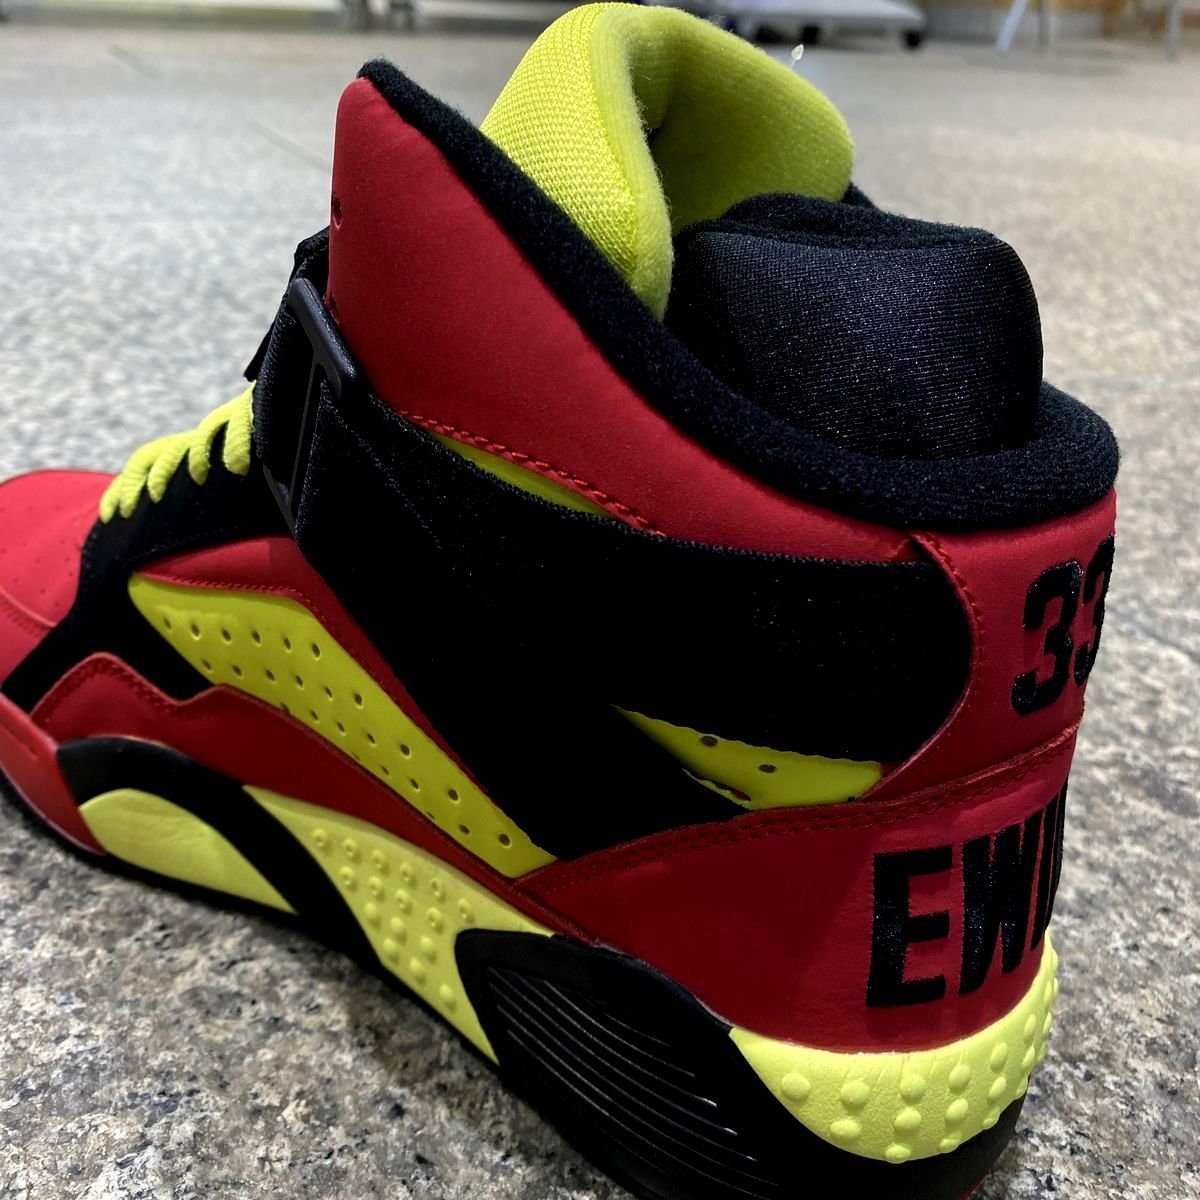  domestic not yet sale [us9] EWING Patrick You wing FOCUS Focus USA regular goods bashuNBA sneakers 27cm Old school red yellow color 